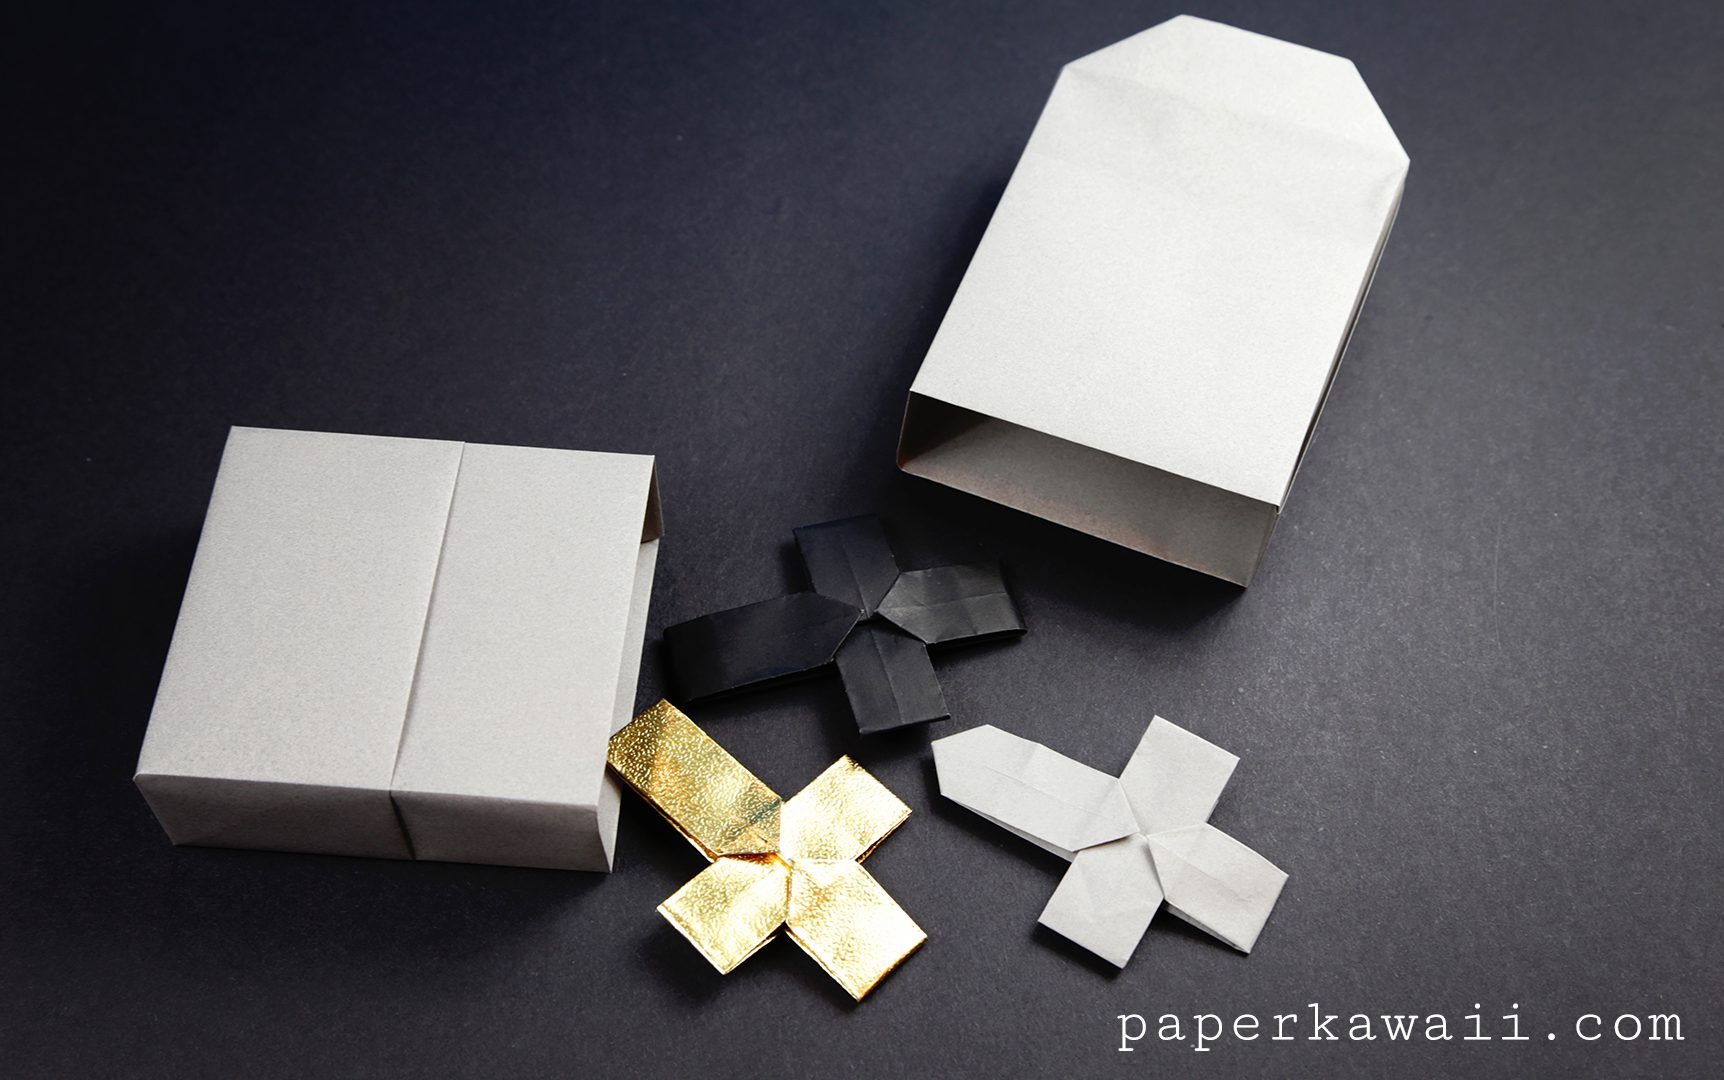 Origami Crosses inside an origami tombstone box!